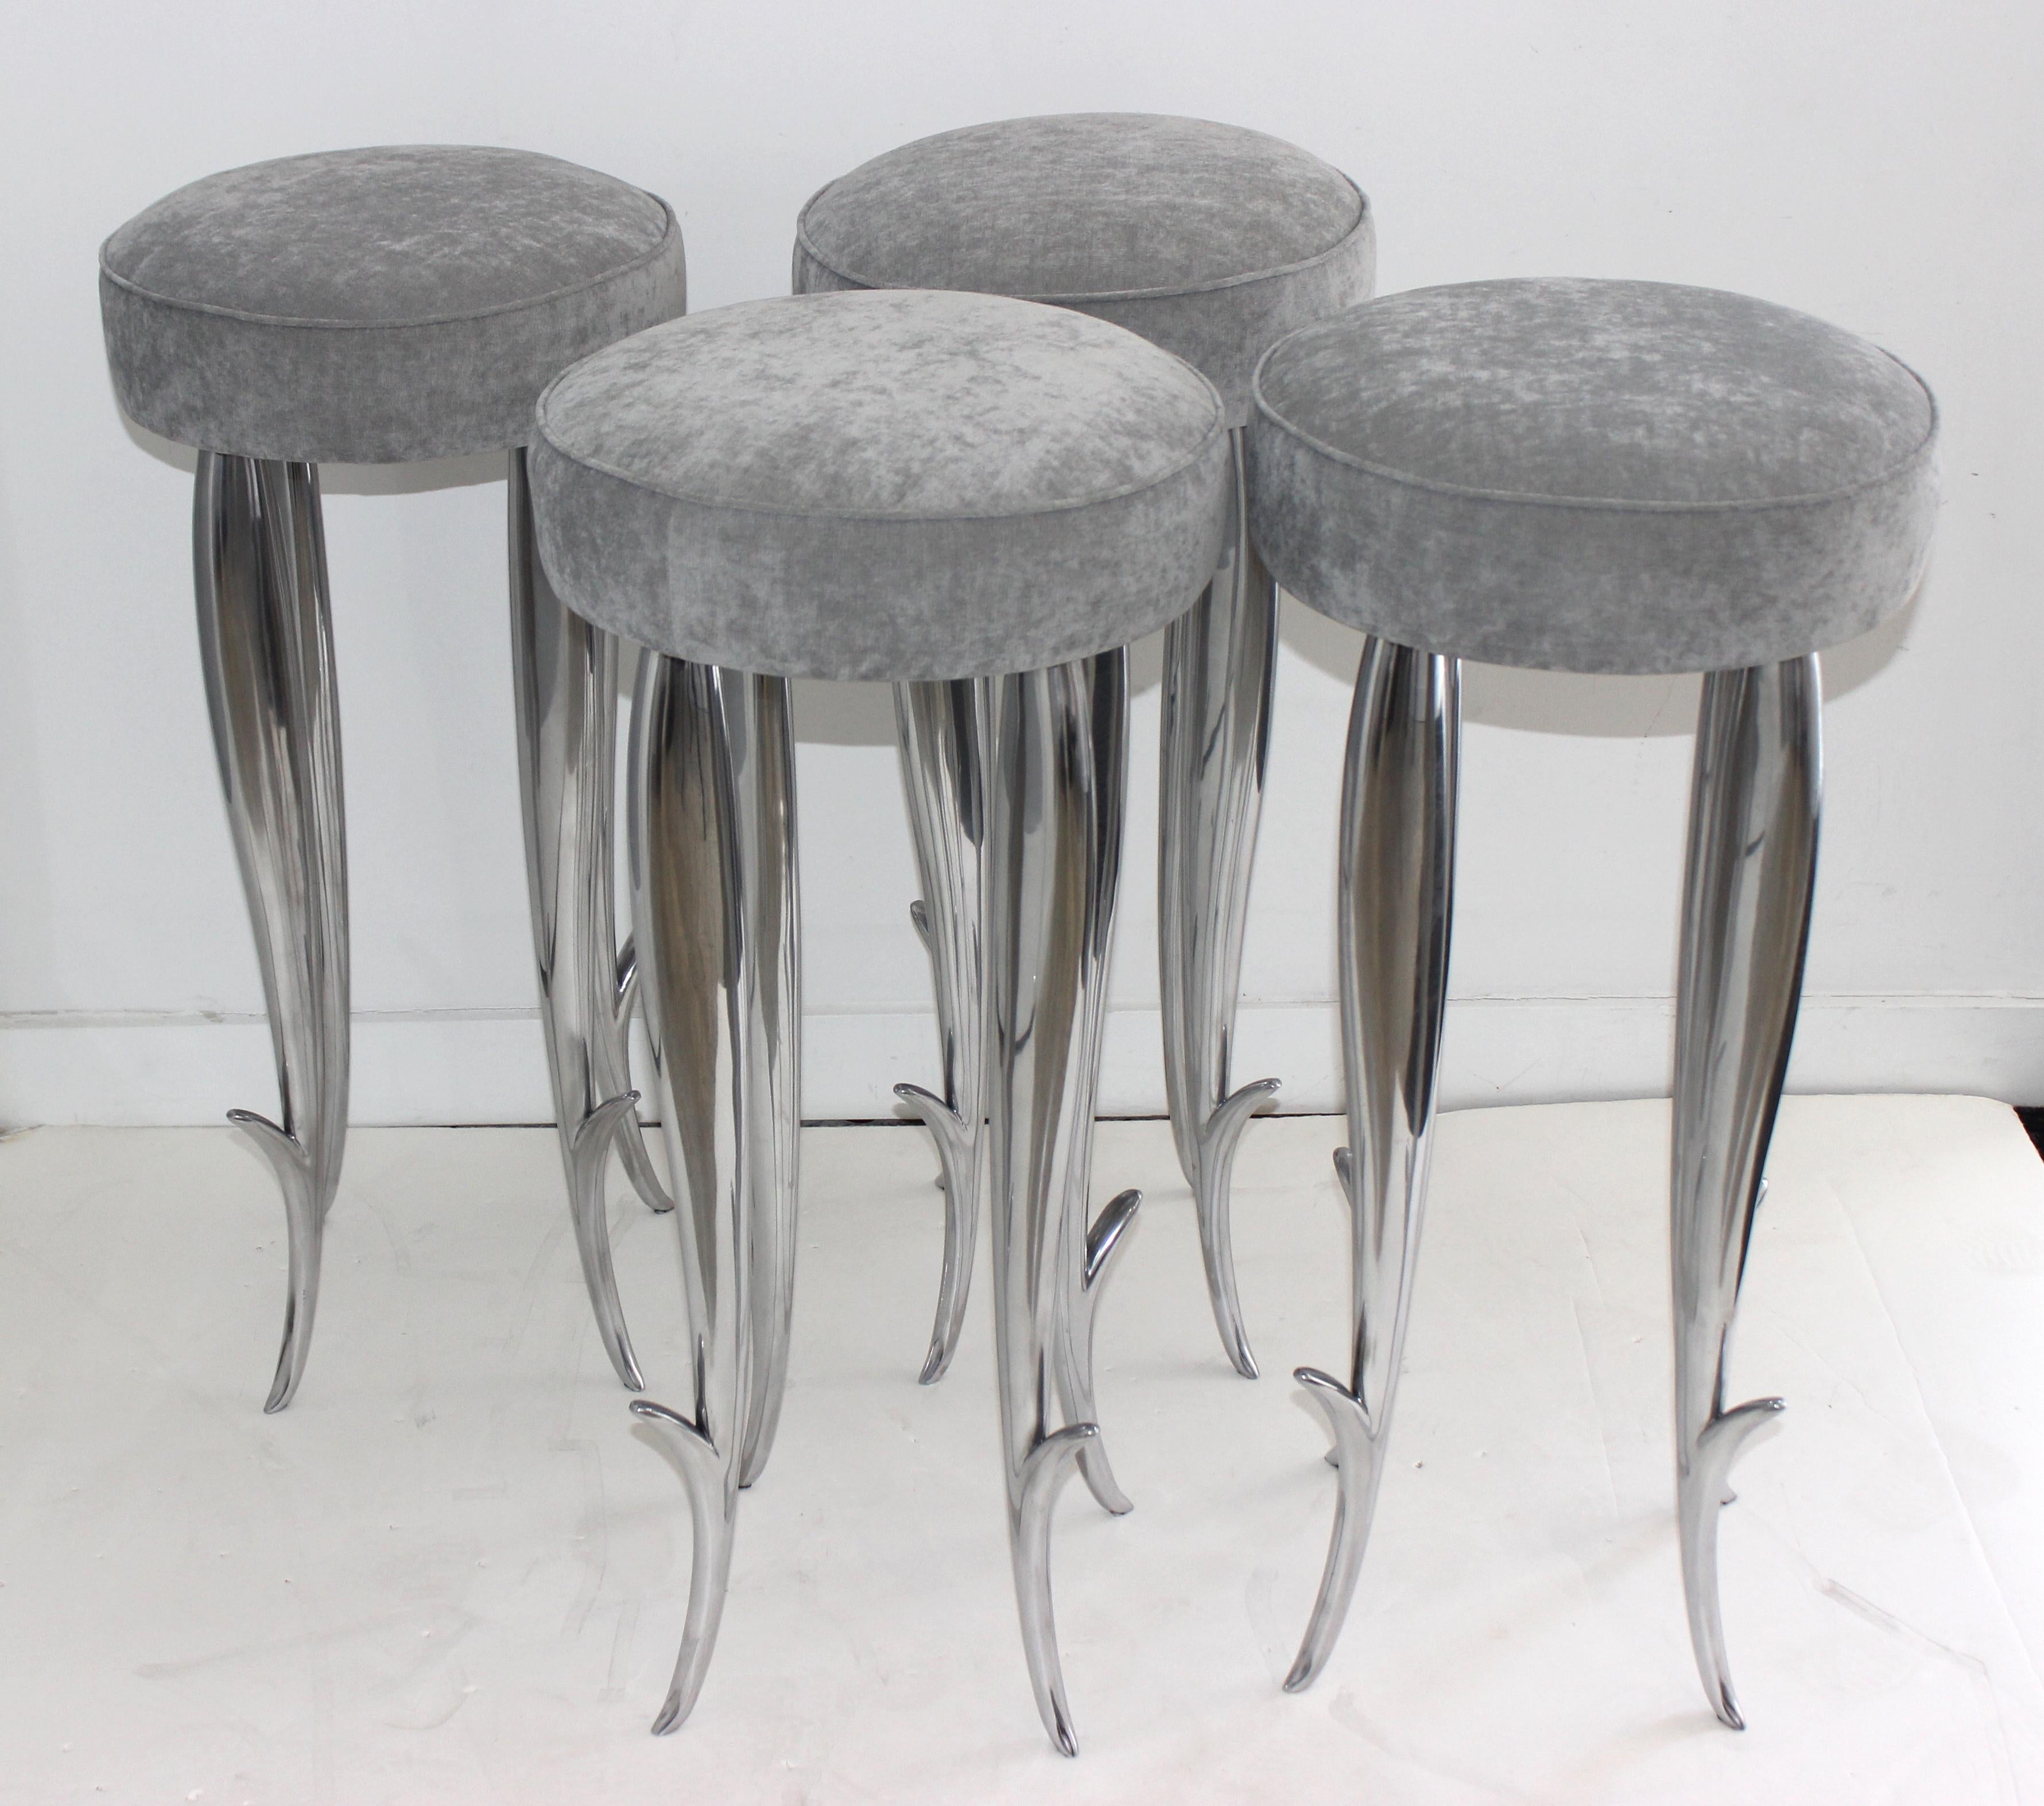 Remarkable set of Philippe Starck Bar Stools designed for the luxury Manhattan mid-town boutique hotel in the 1990s. This has the imprint STARCK.XO and has the 4